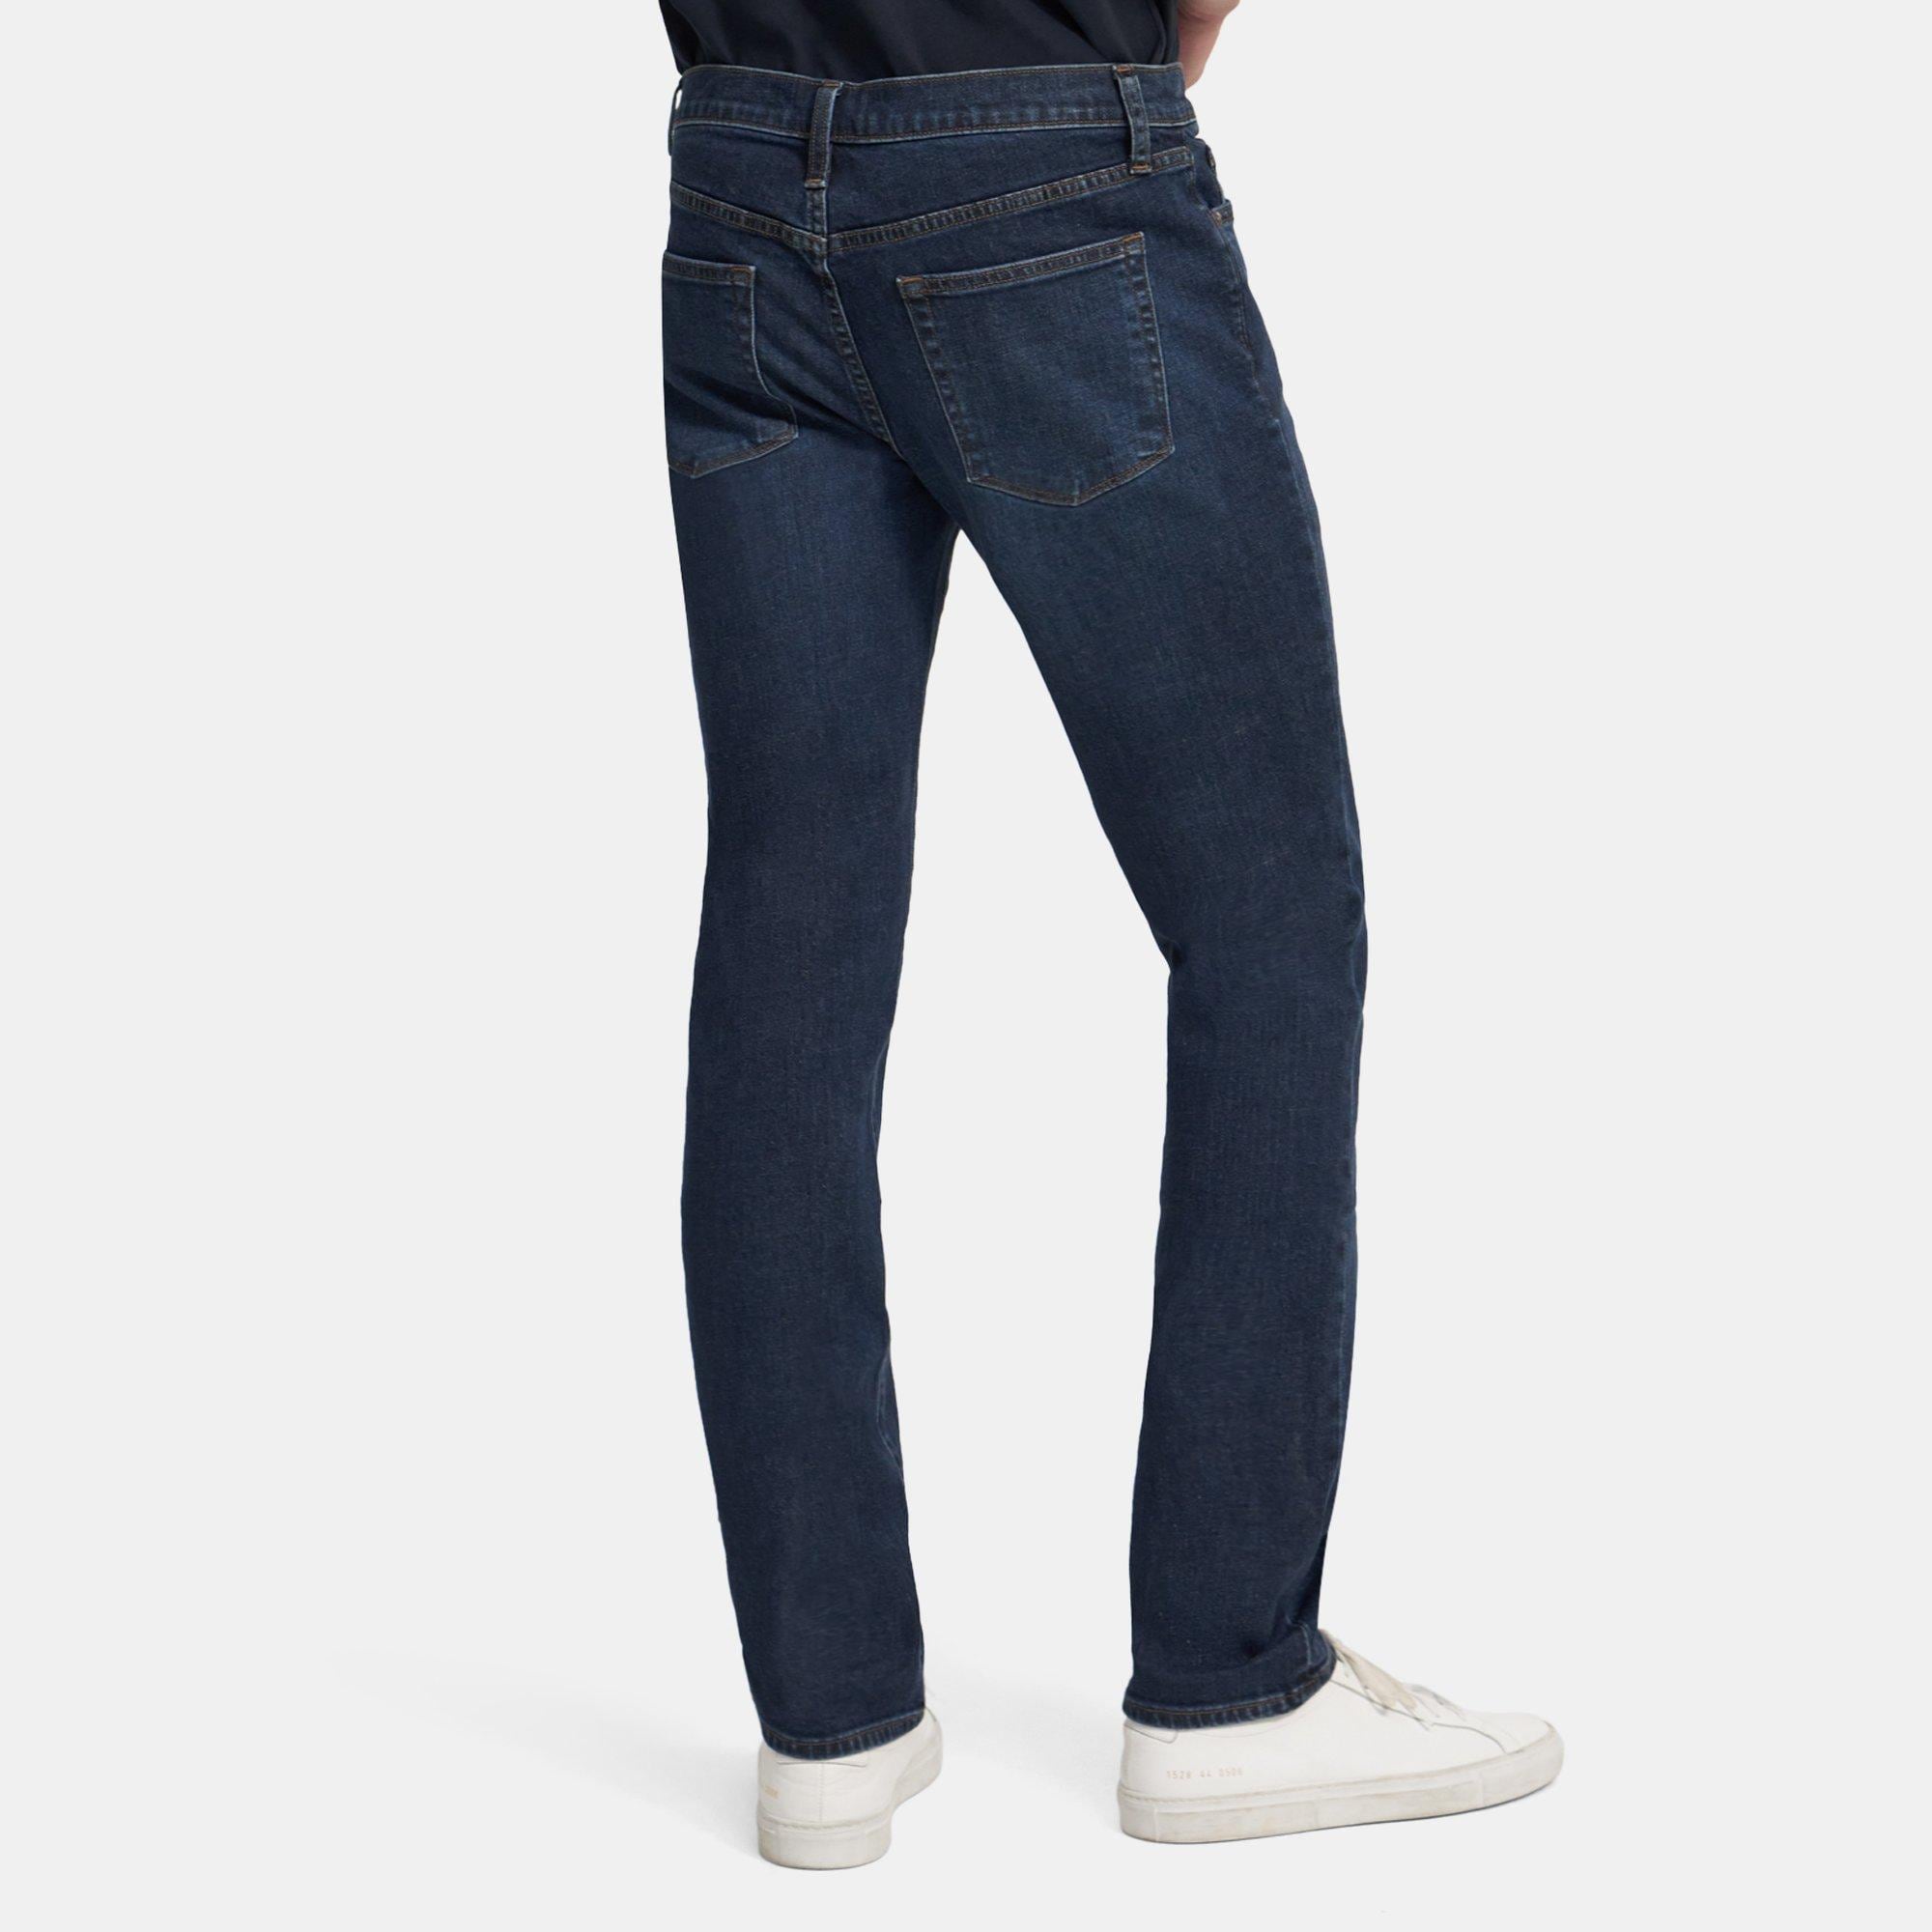 J Brand Kane Straight Fit Jean – Dales Clothing for Men and Women